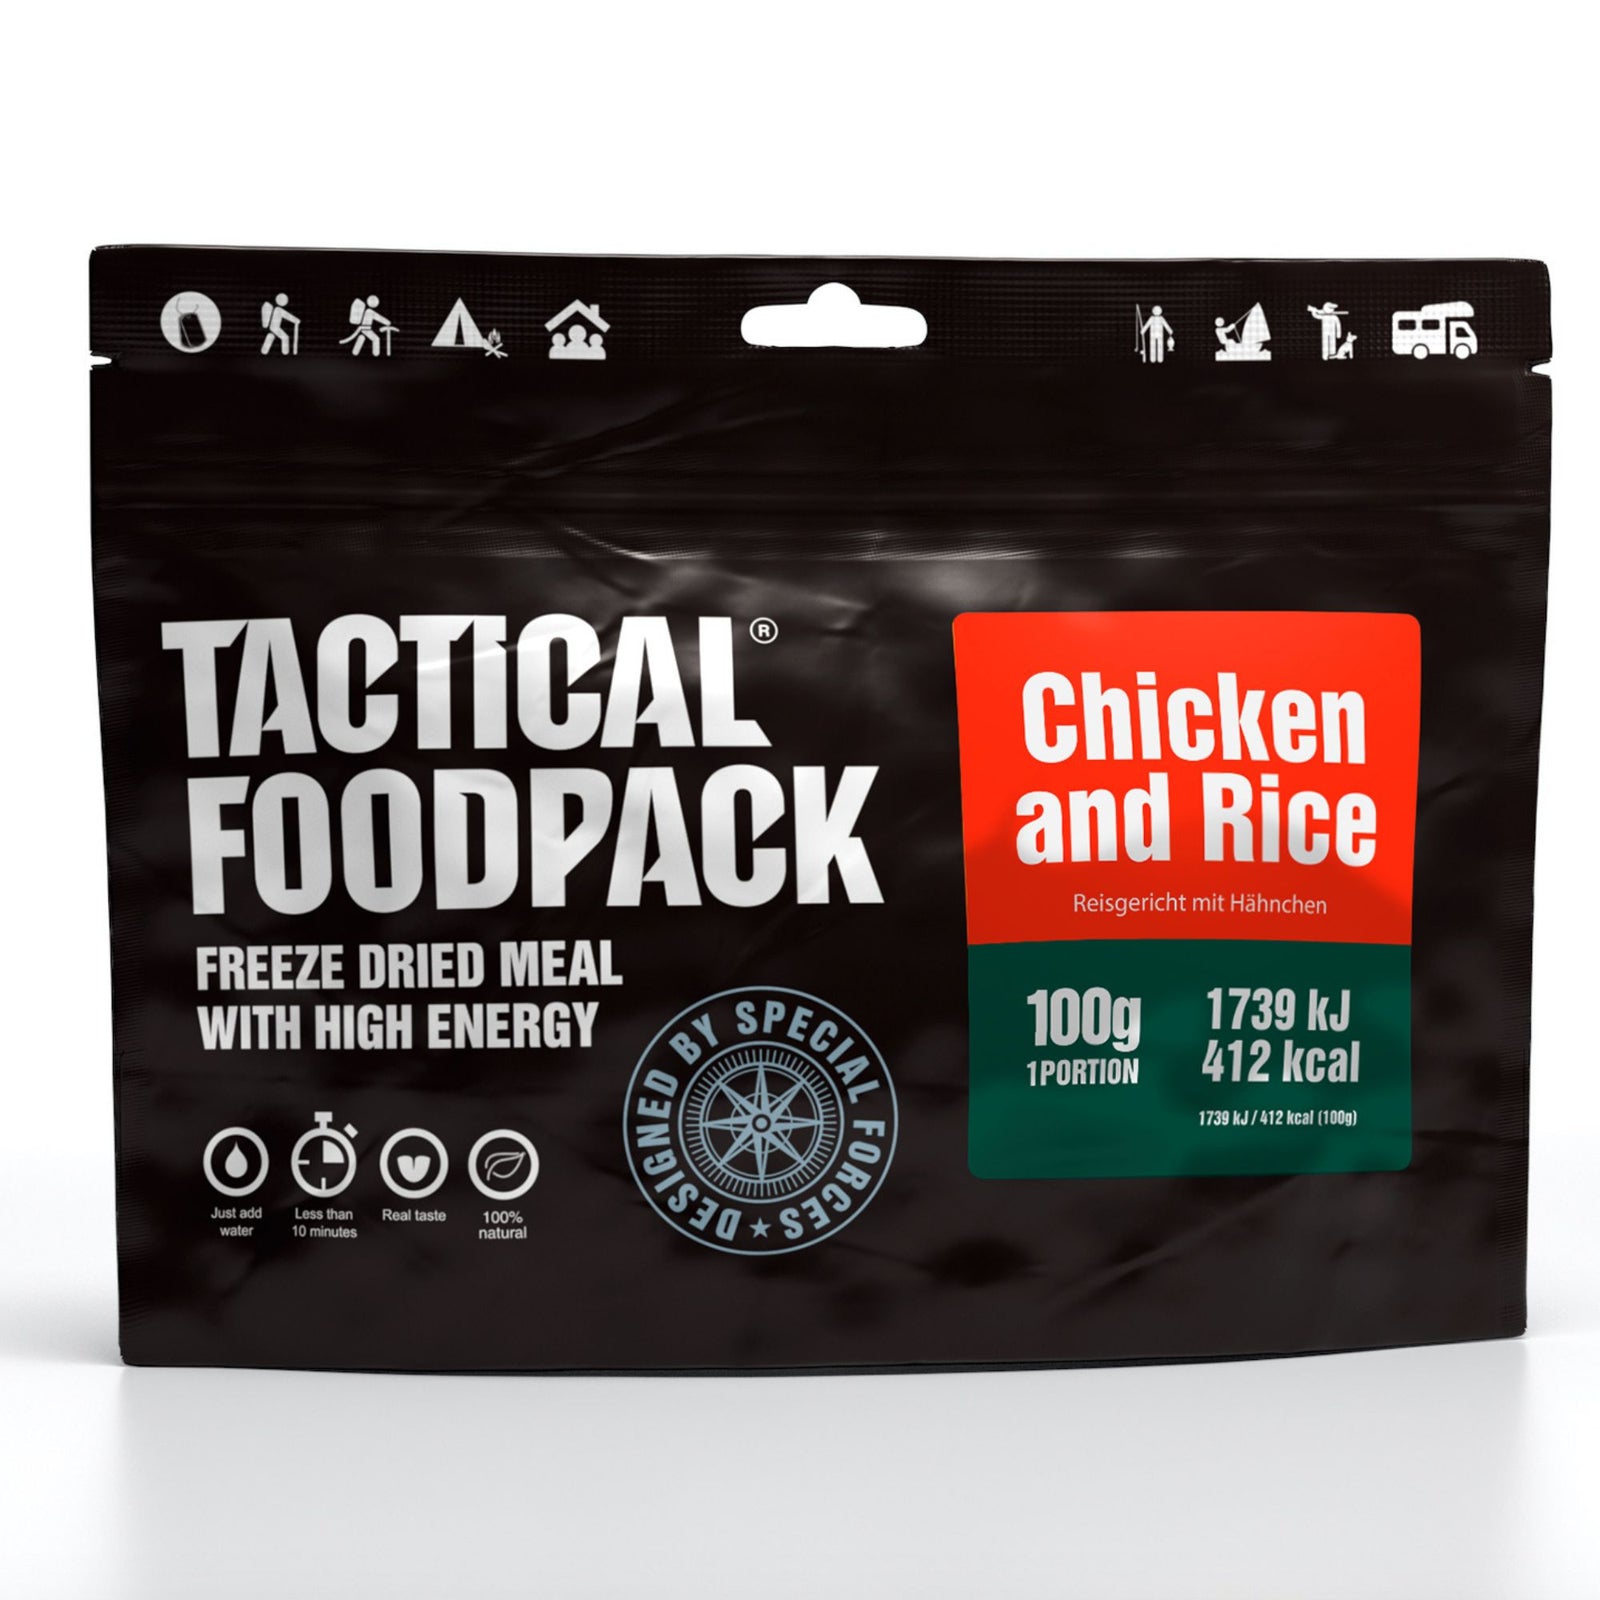 Tactical Foodpack | Chicken and Rice 100g - Riso con pollo